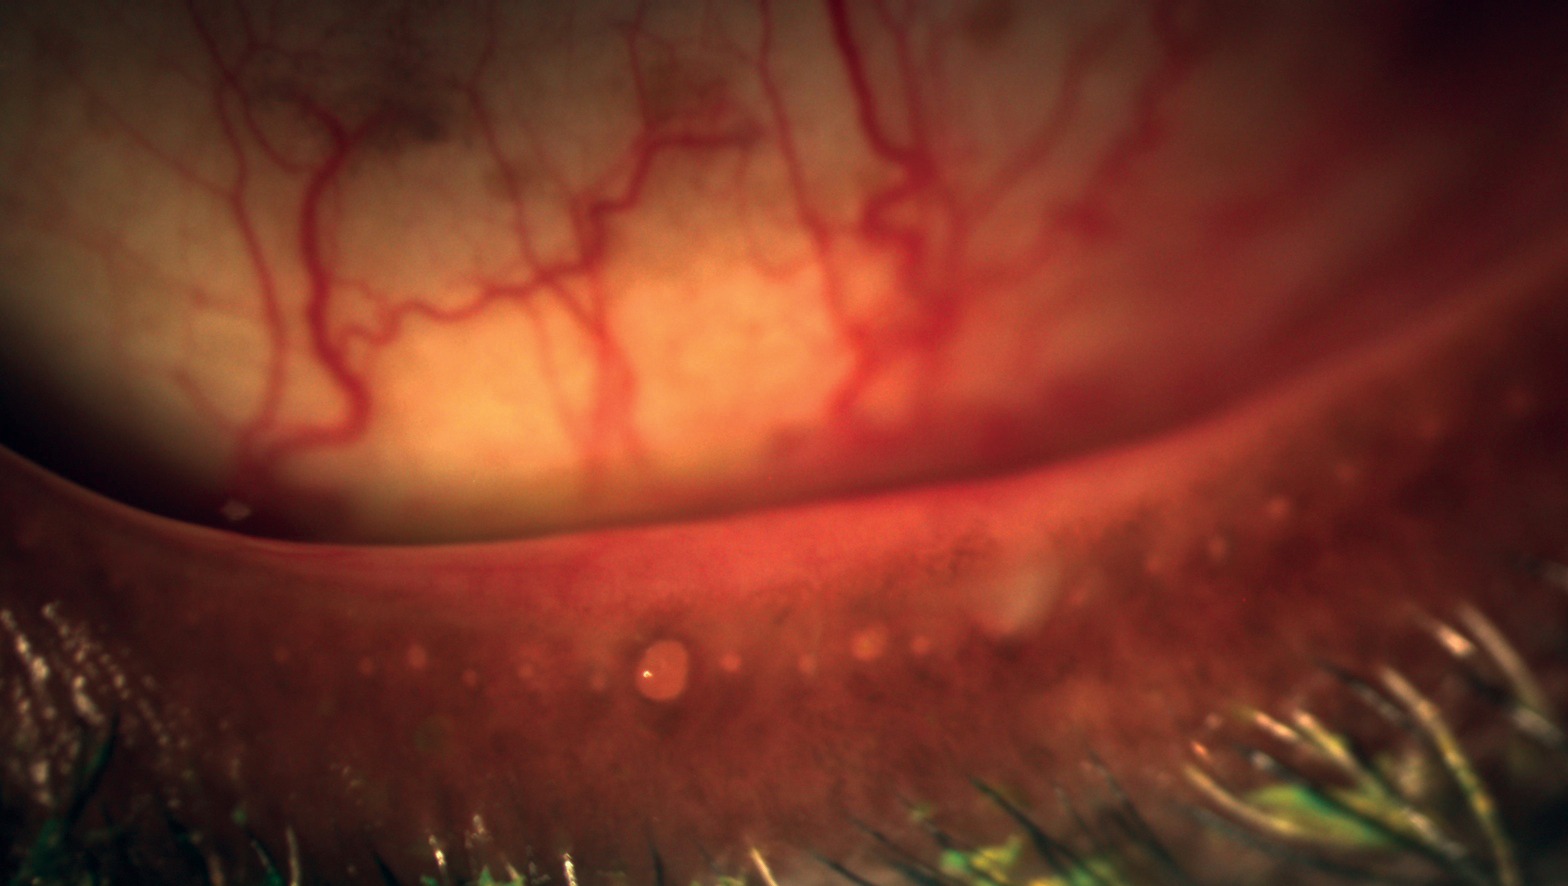 Antibiotics treat meibomian gland dysfunction by altering the eyelid microbiome. Understanding the microbiota of a healthy eye may help to improve disease diagnosis and personalized treatment approaches.